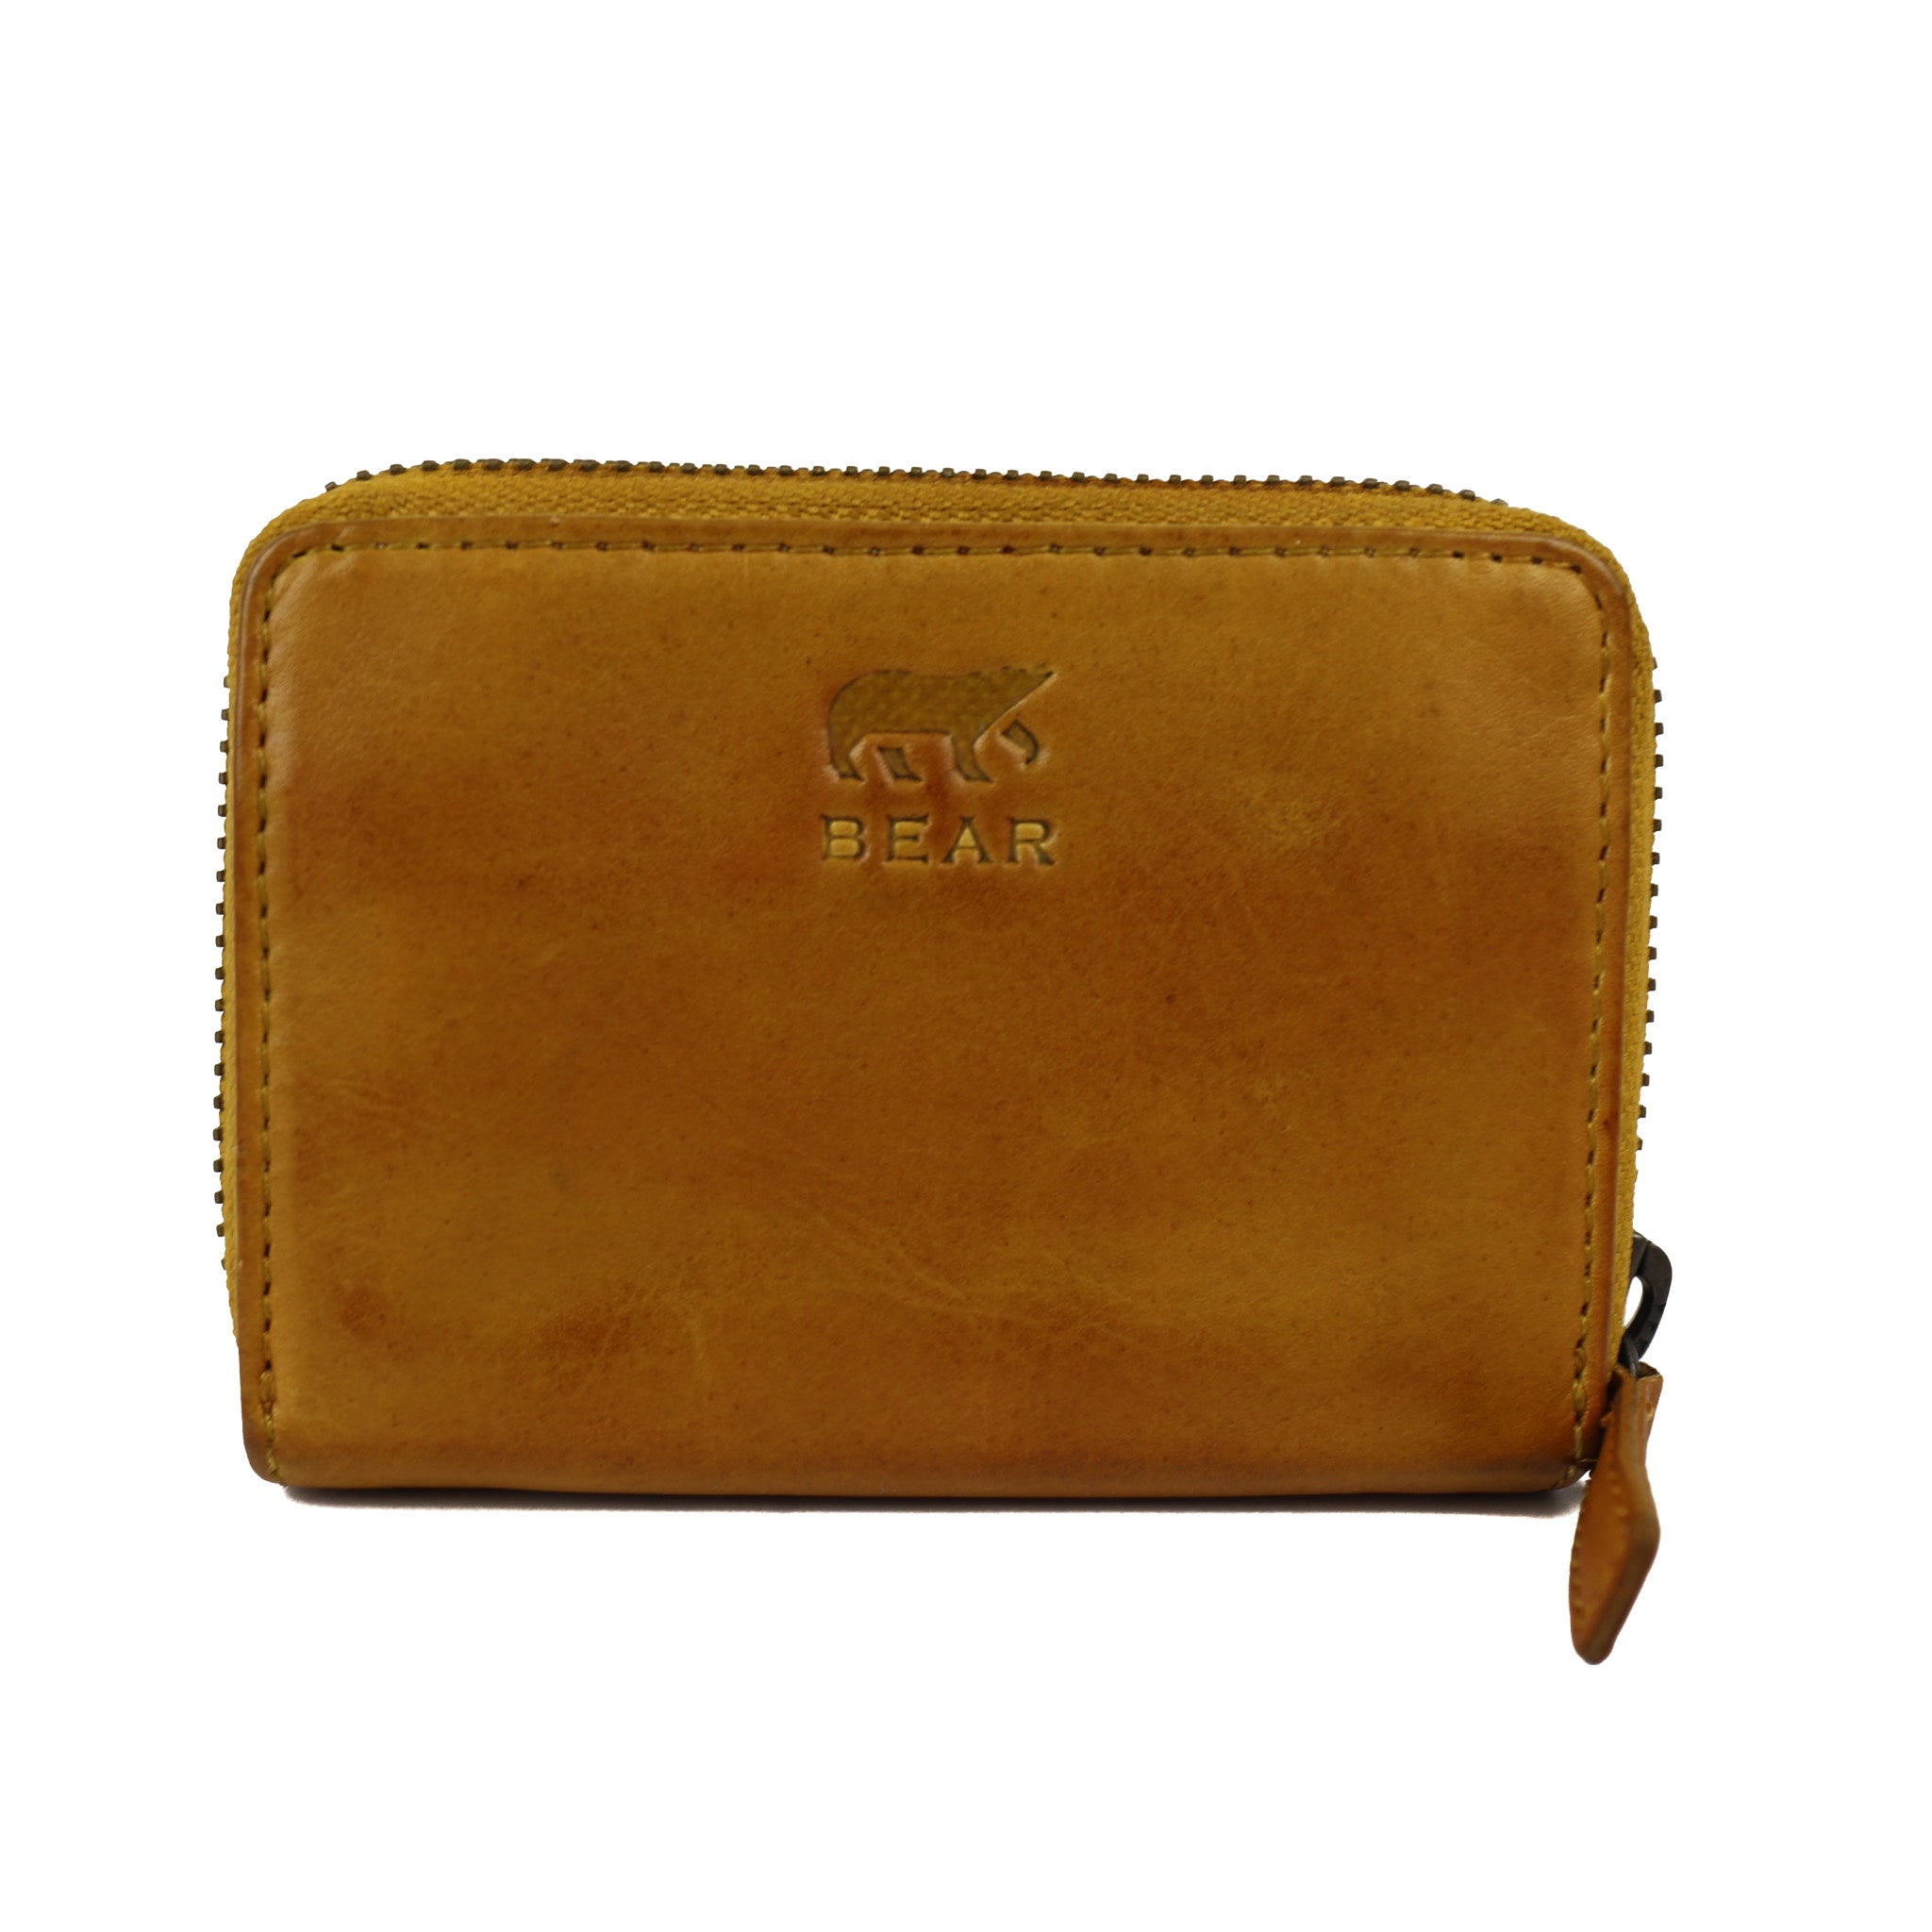 Card holder 'Rudie' yellow - CL 19408